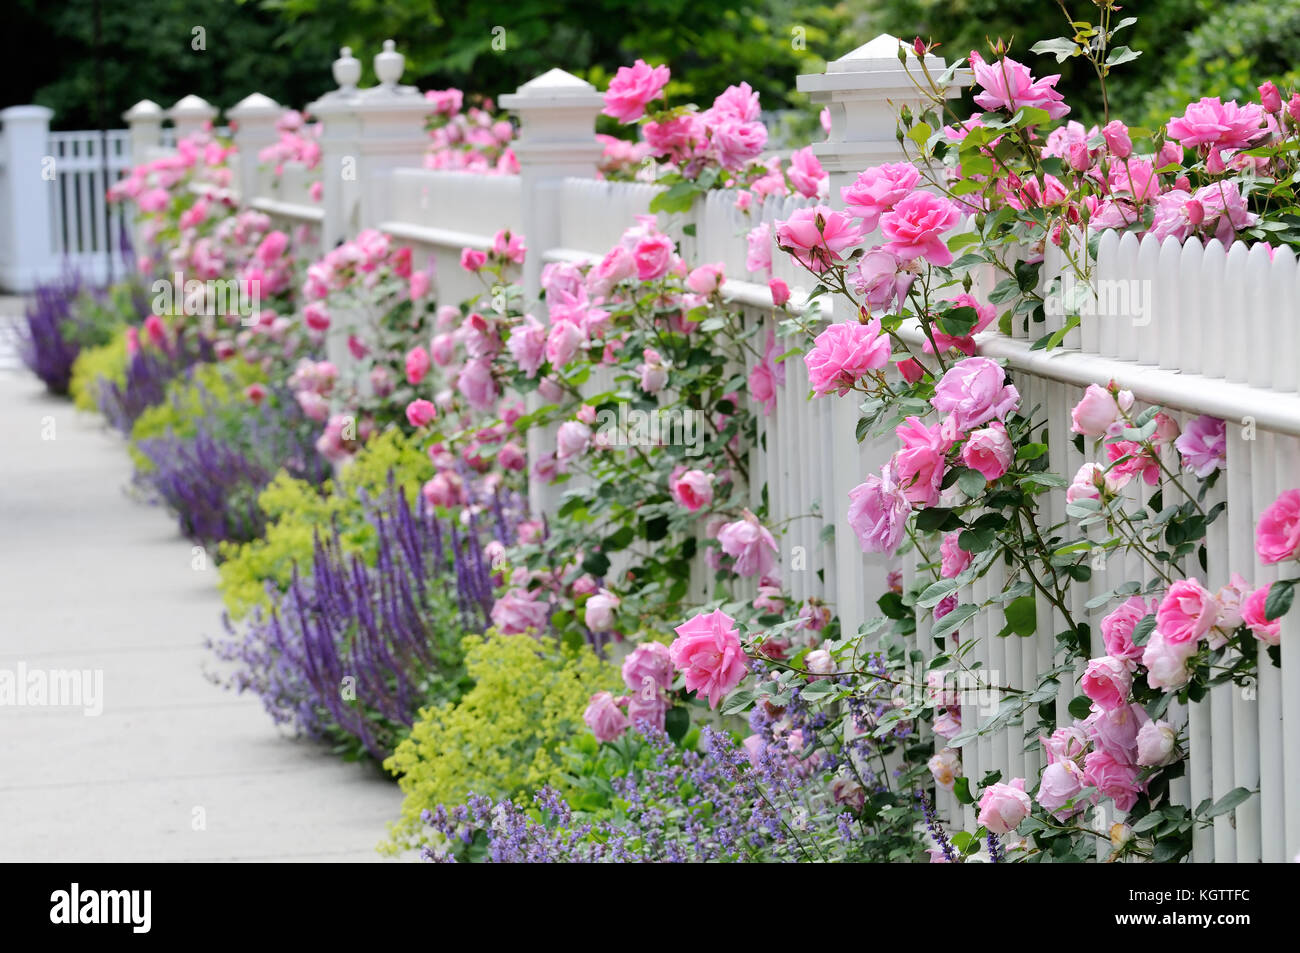 White fence, pink roses and colorful garden border with sage, catmint and lady's mantle. Stock Photo